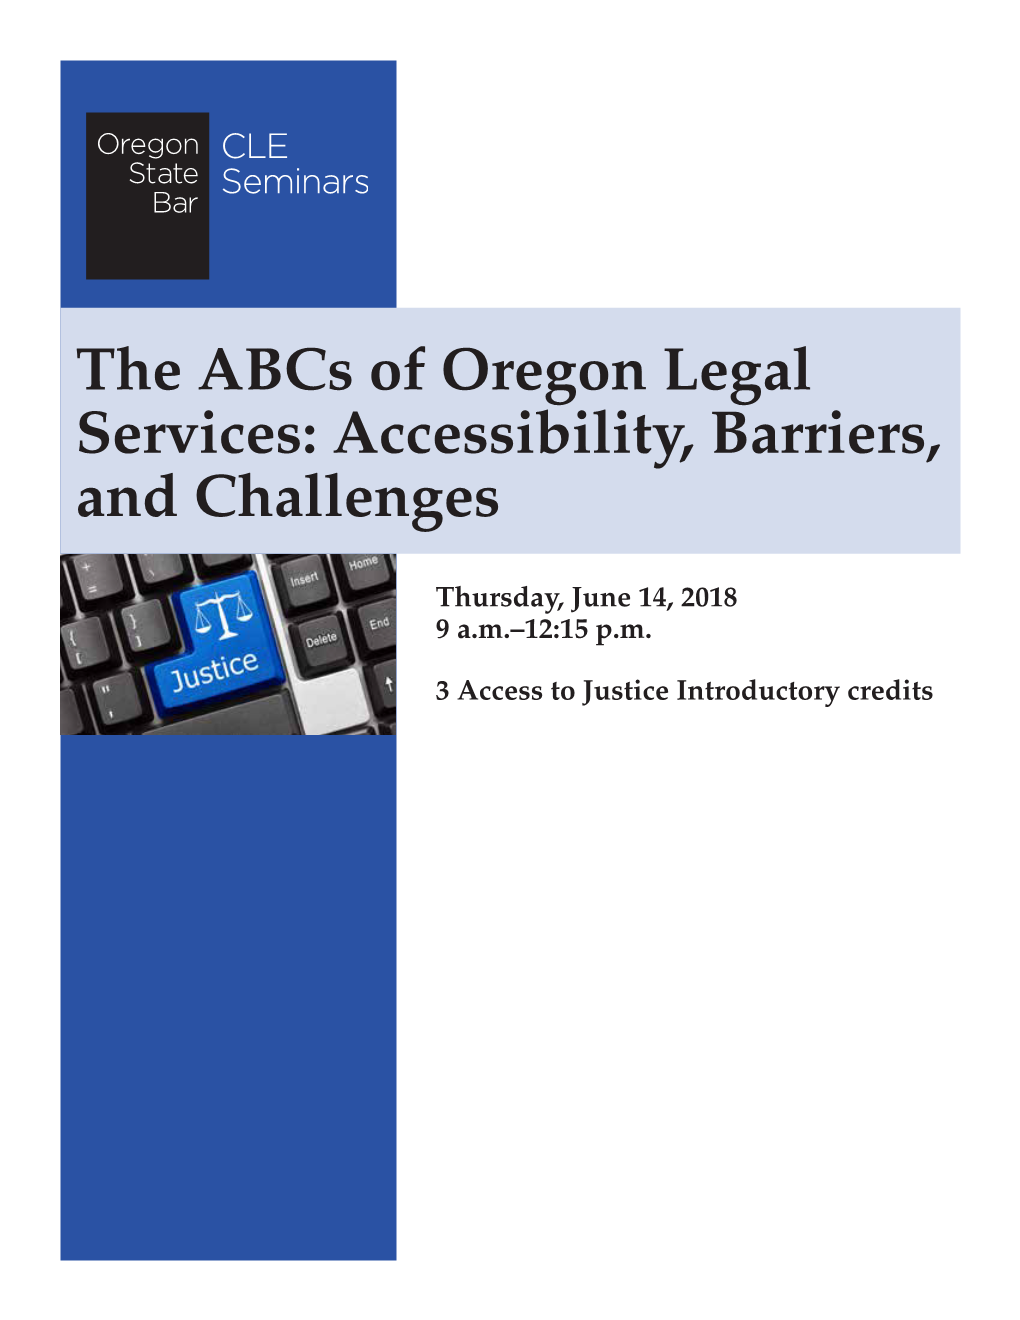 The Abcs of Oregon Legal Services: Accessibility, Barriers, and Challenges